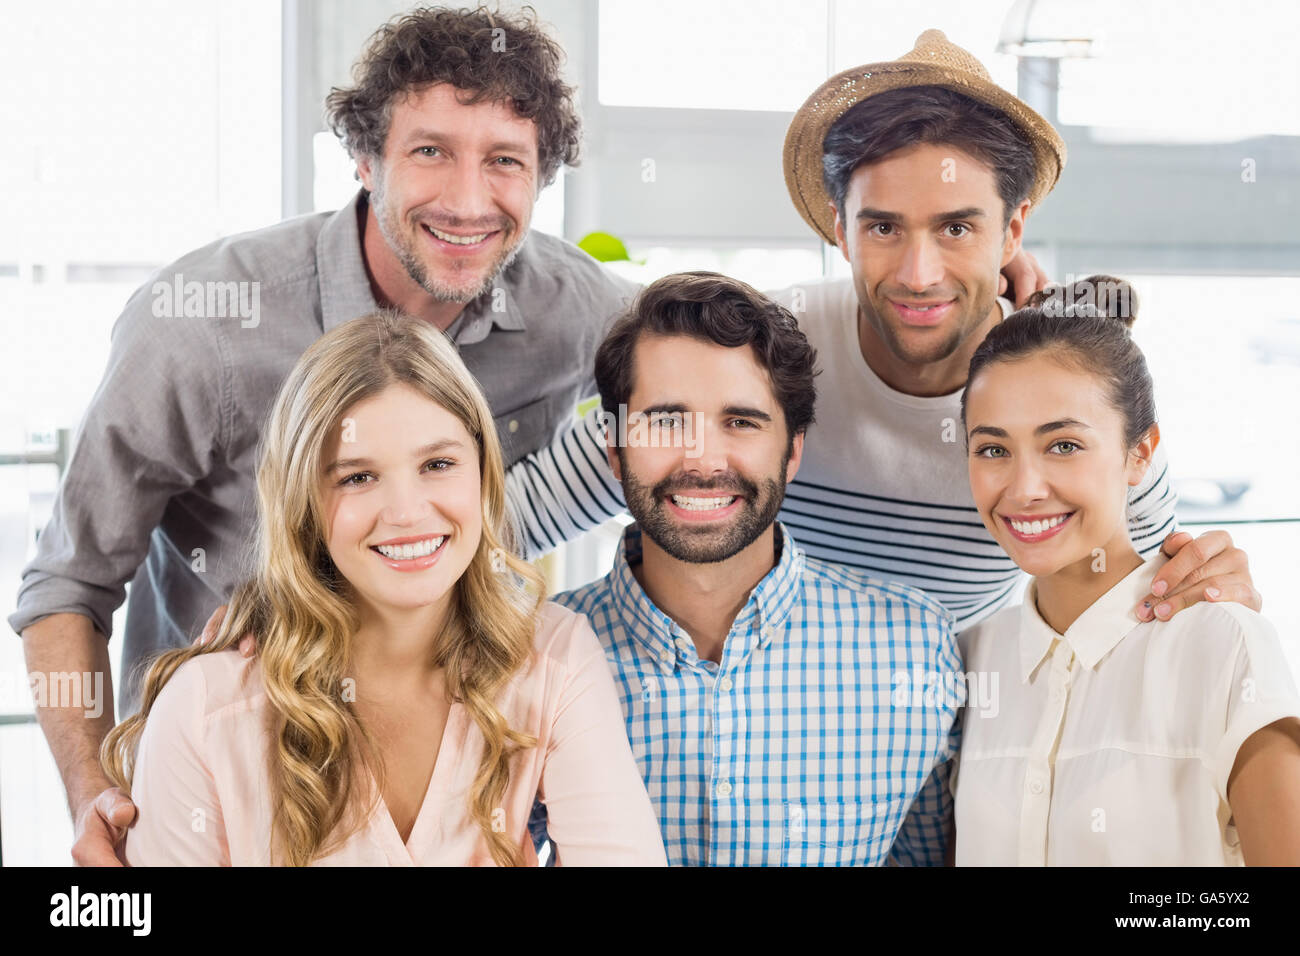 Portrait of smiling friends posing together Stock Photo